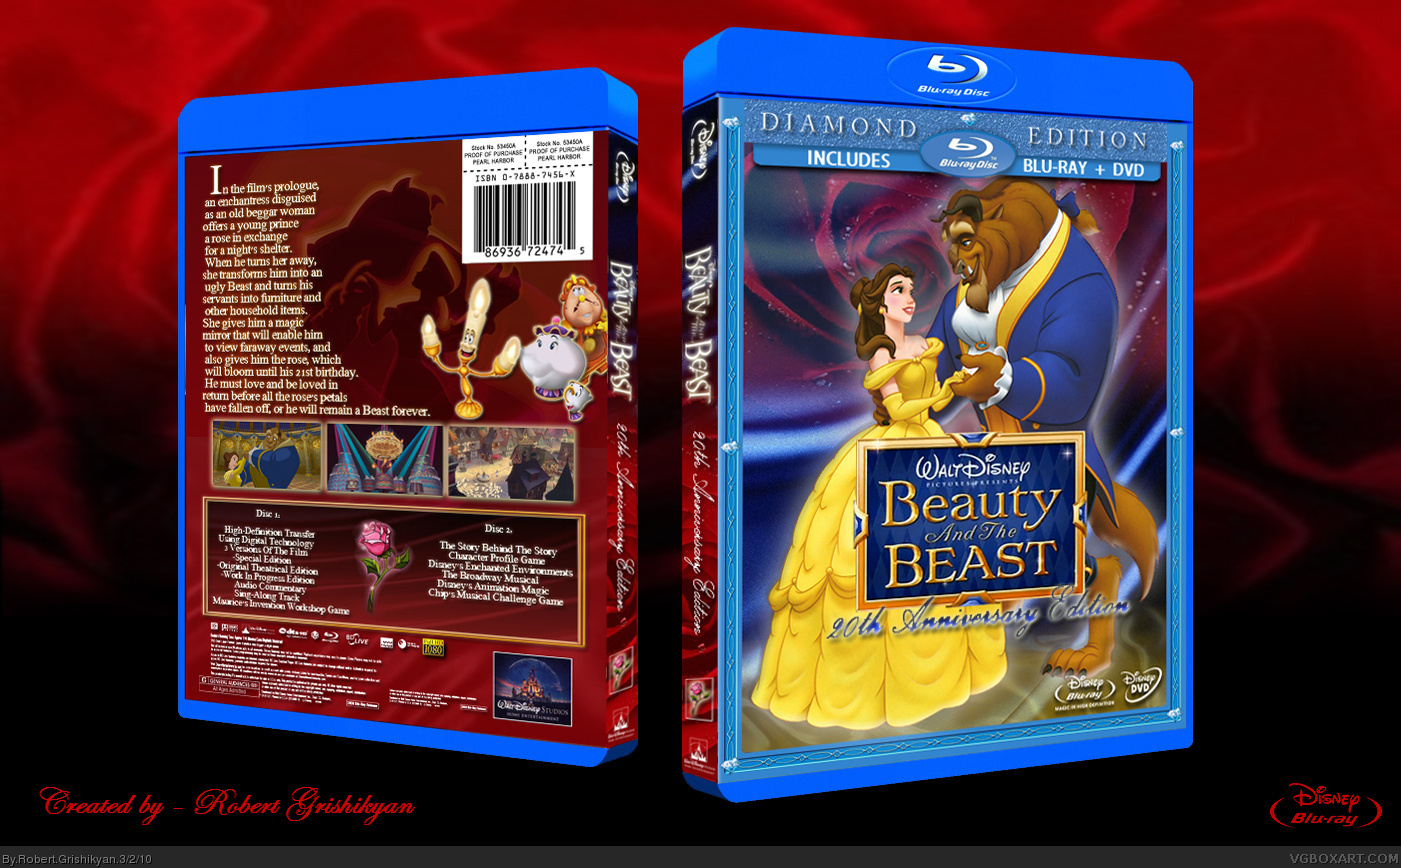 Beauty and the Beast: 20th Anniversary Edition box cover